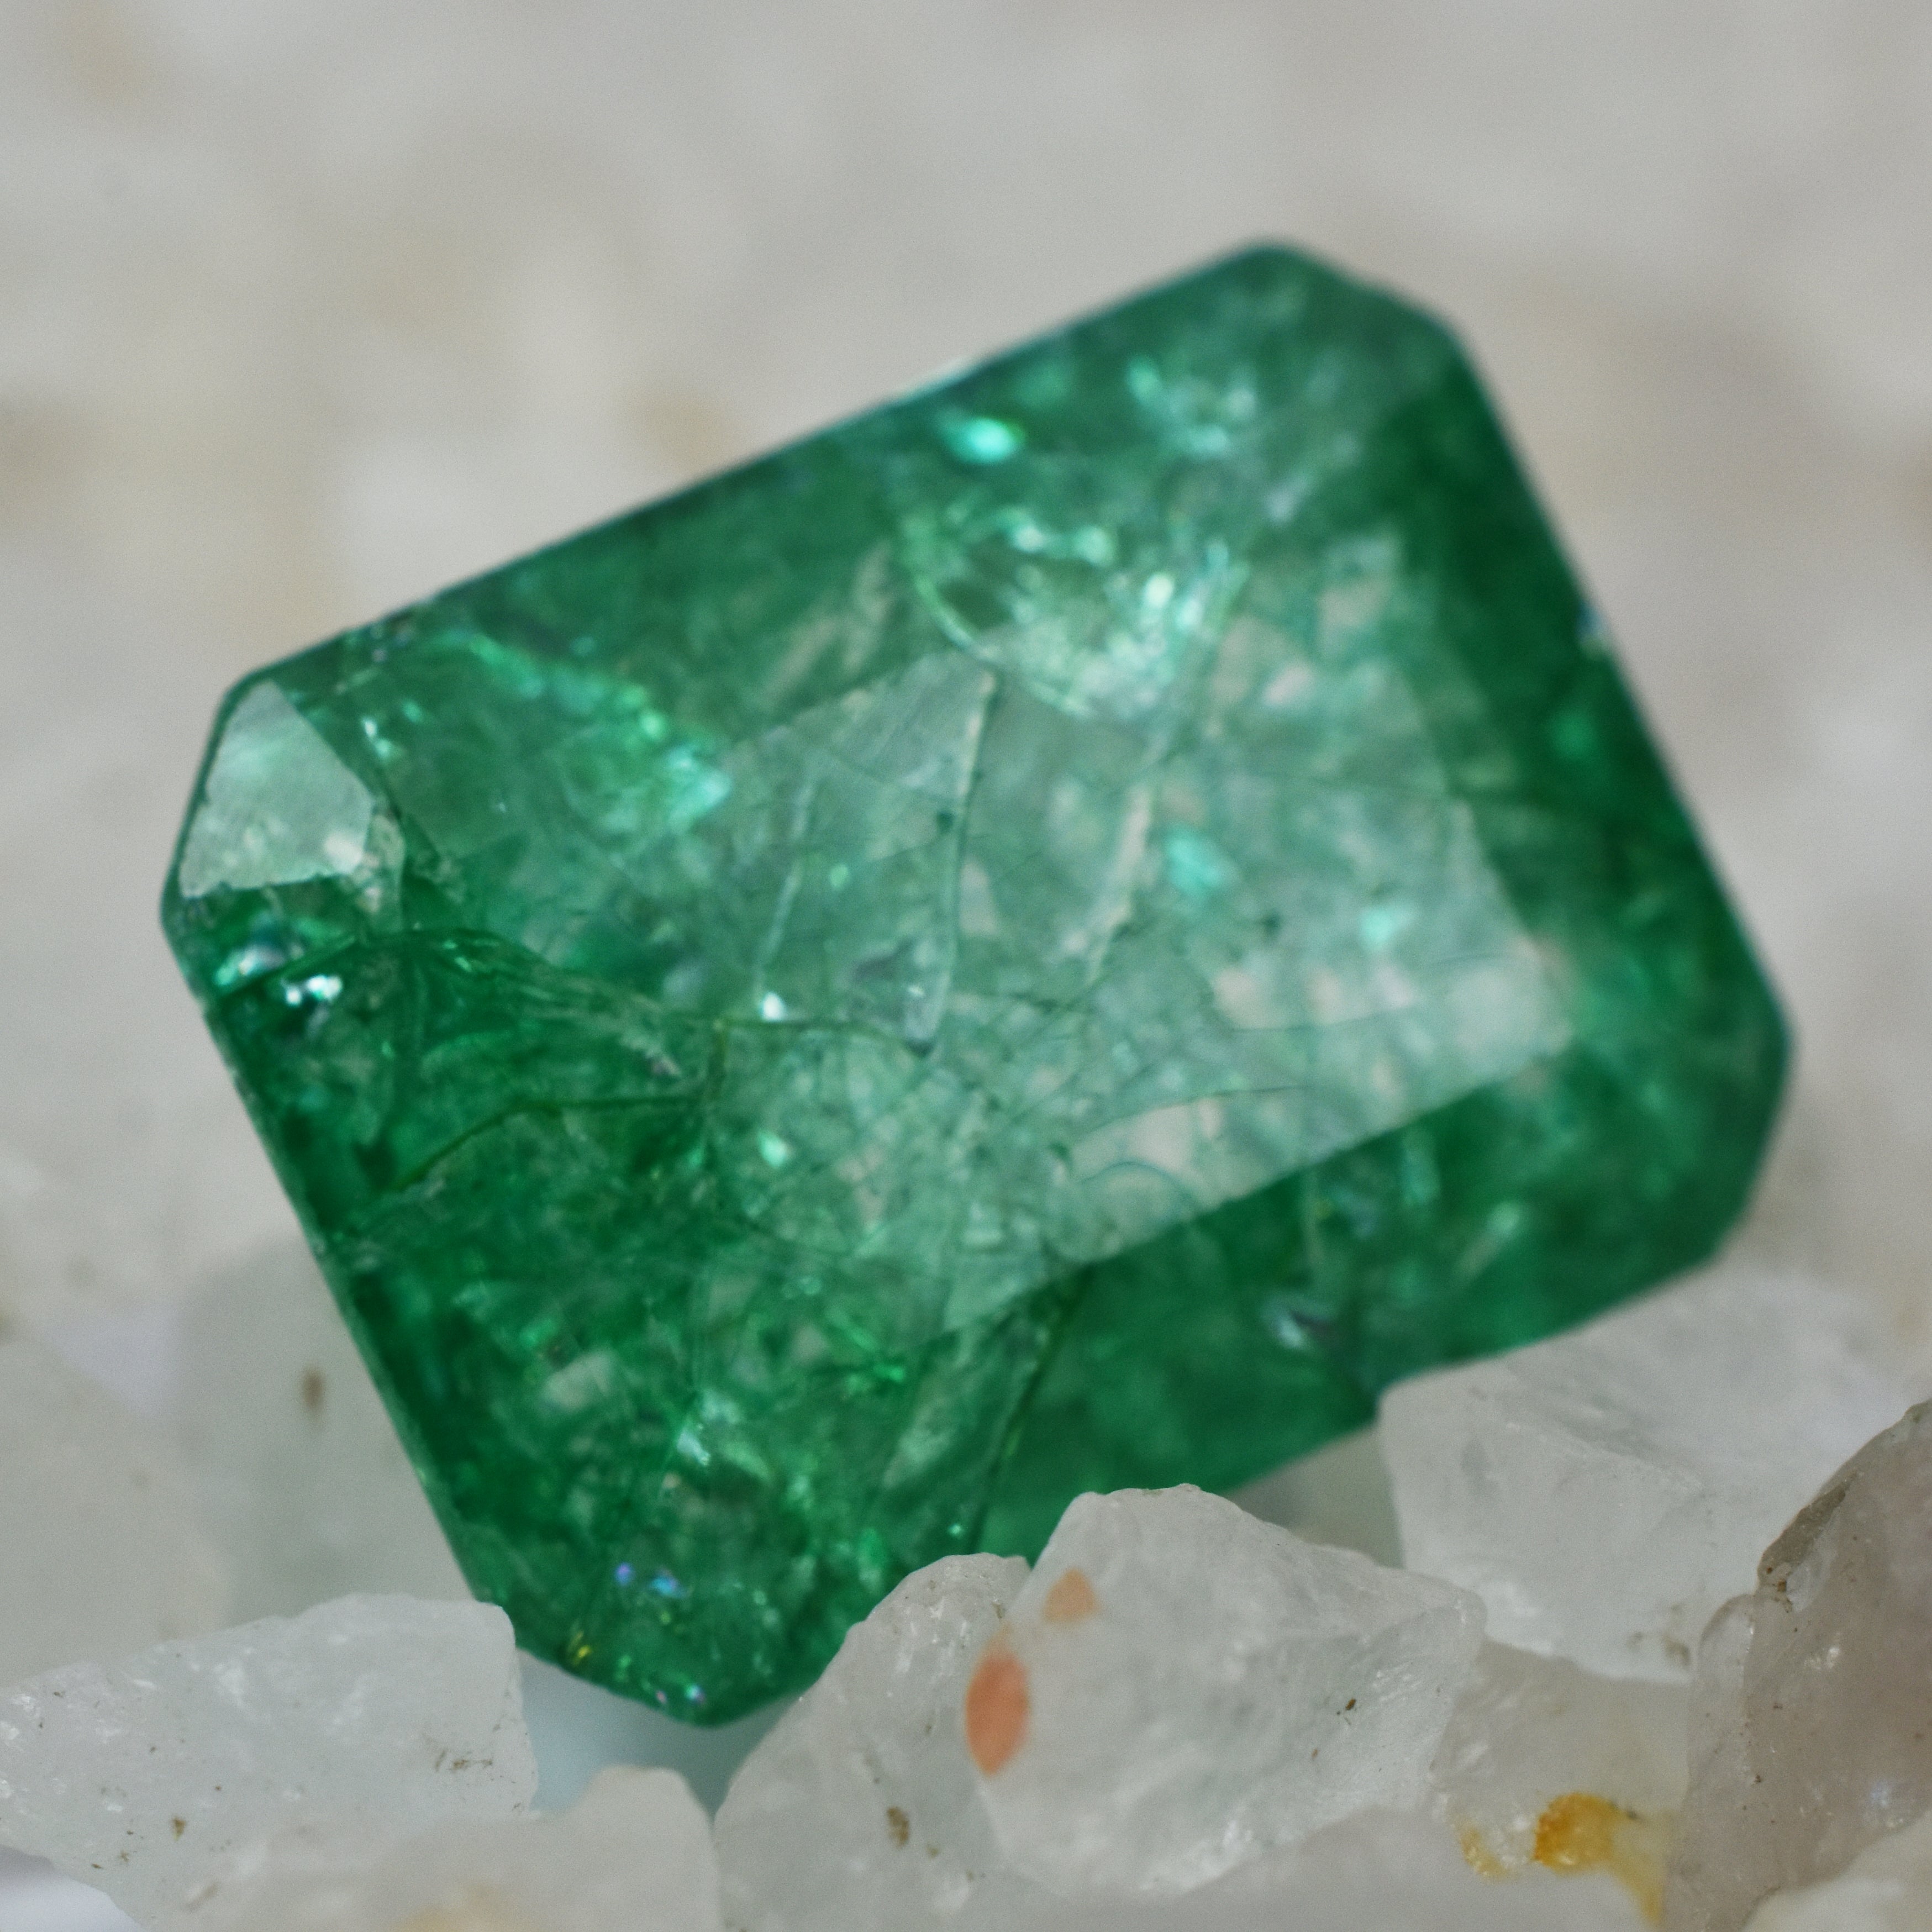 Free Shipping & Gift | Best Offer | A++ Quality Emerald Green Gem 10.45 Carat Emerald Green Emerald Cut Natural Certified Loose Gemstone | Gift For Loved Ones